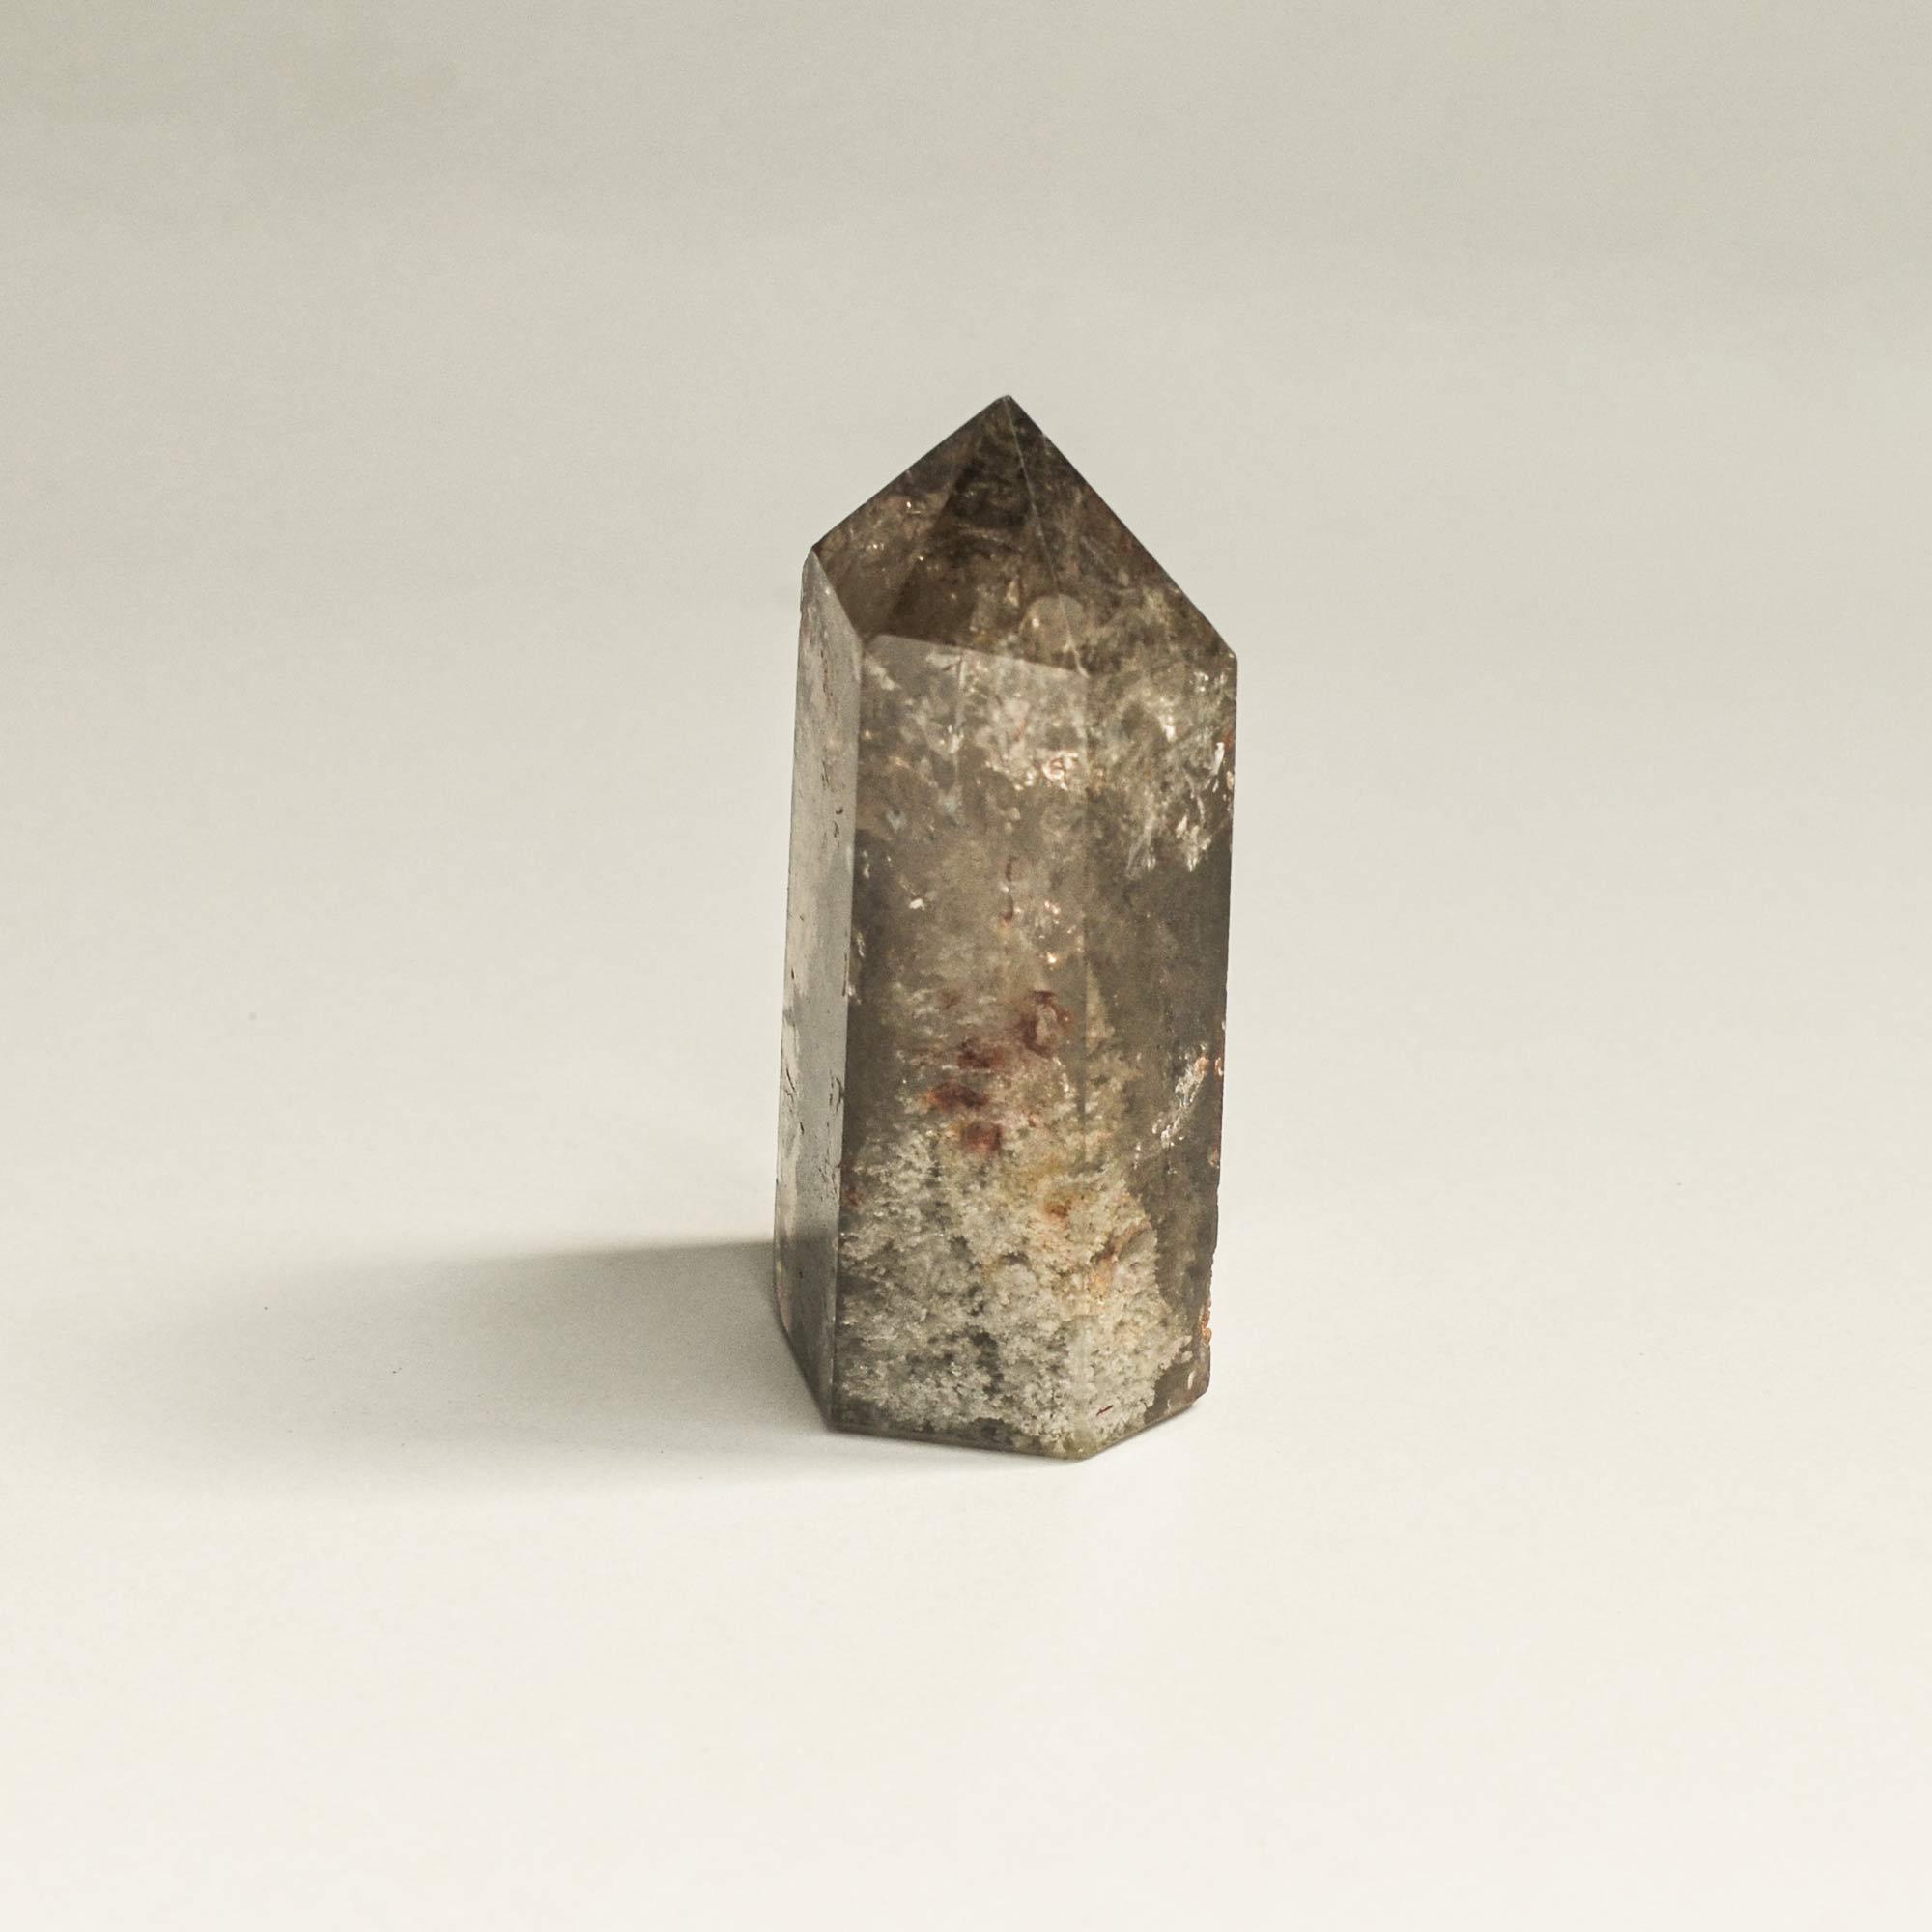 The side view of the phantom quartz crystal tower in brown hexagonal shape